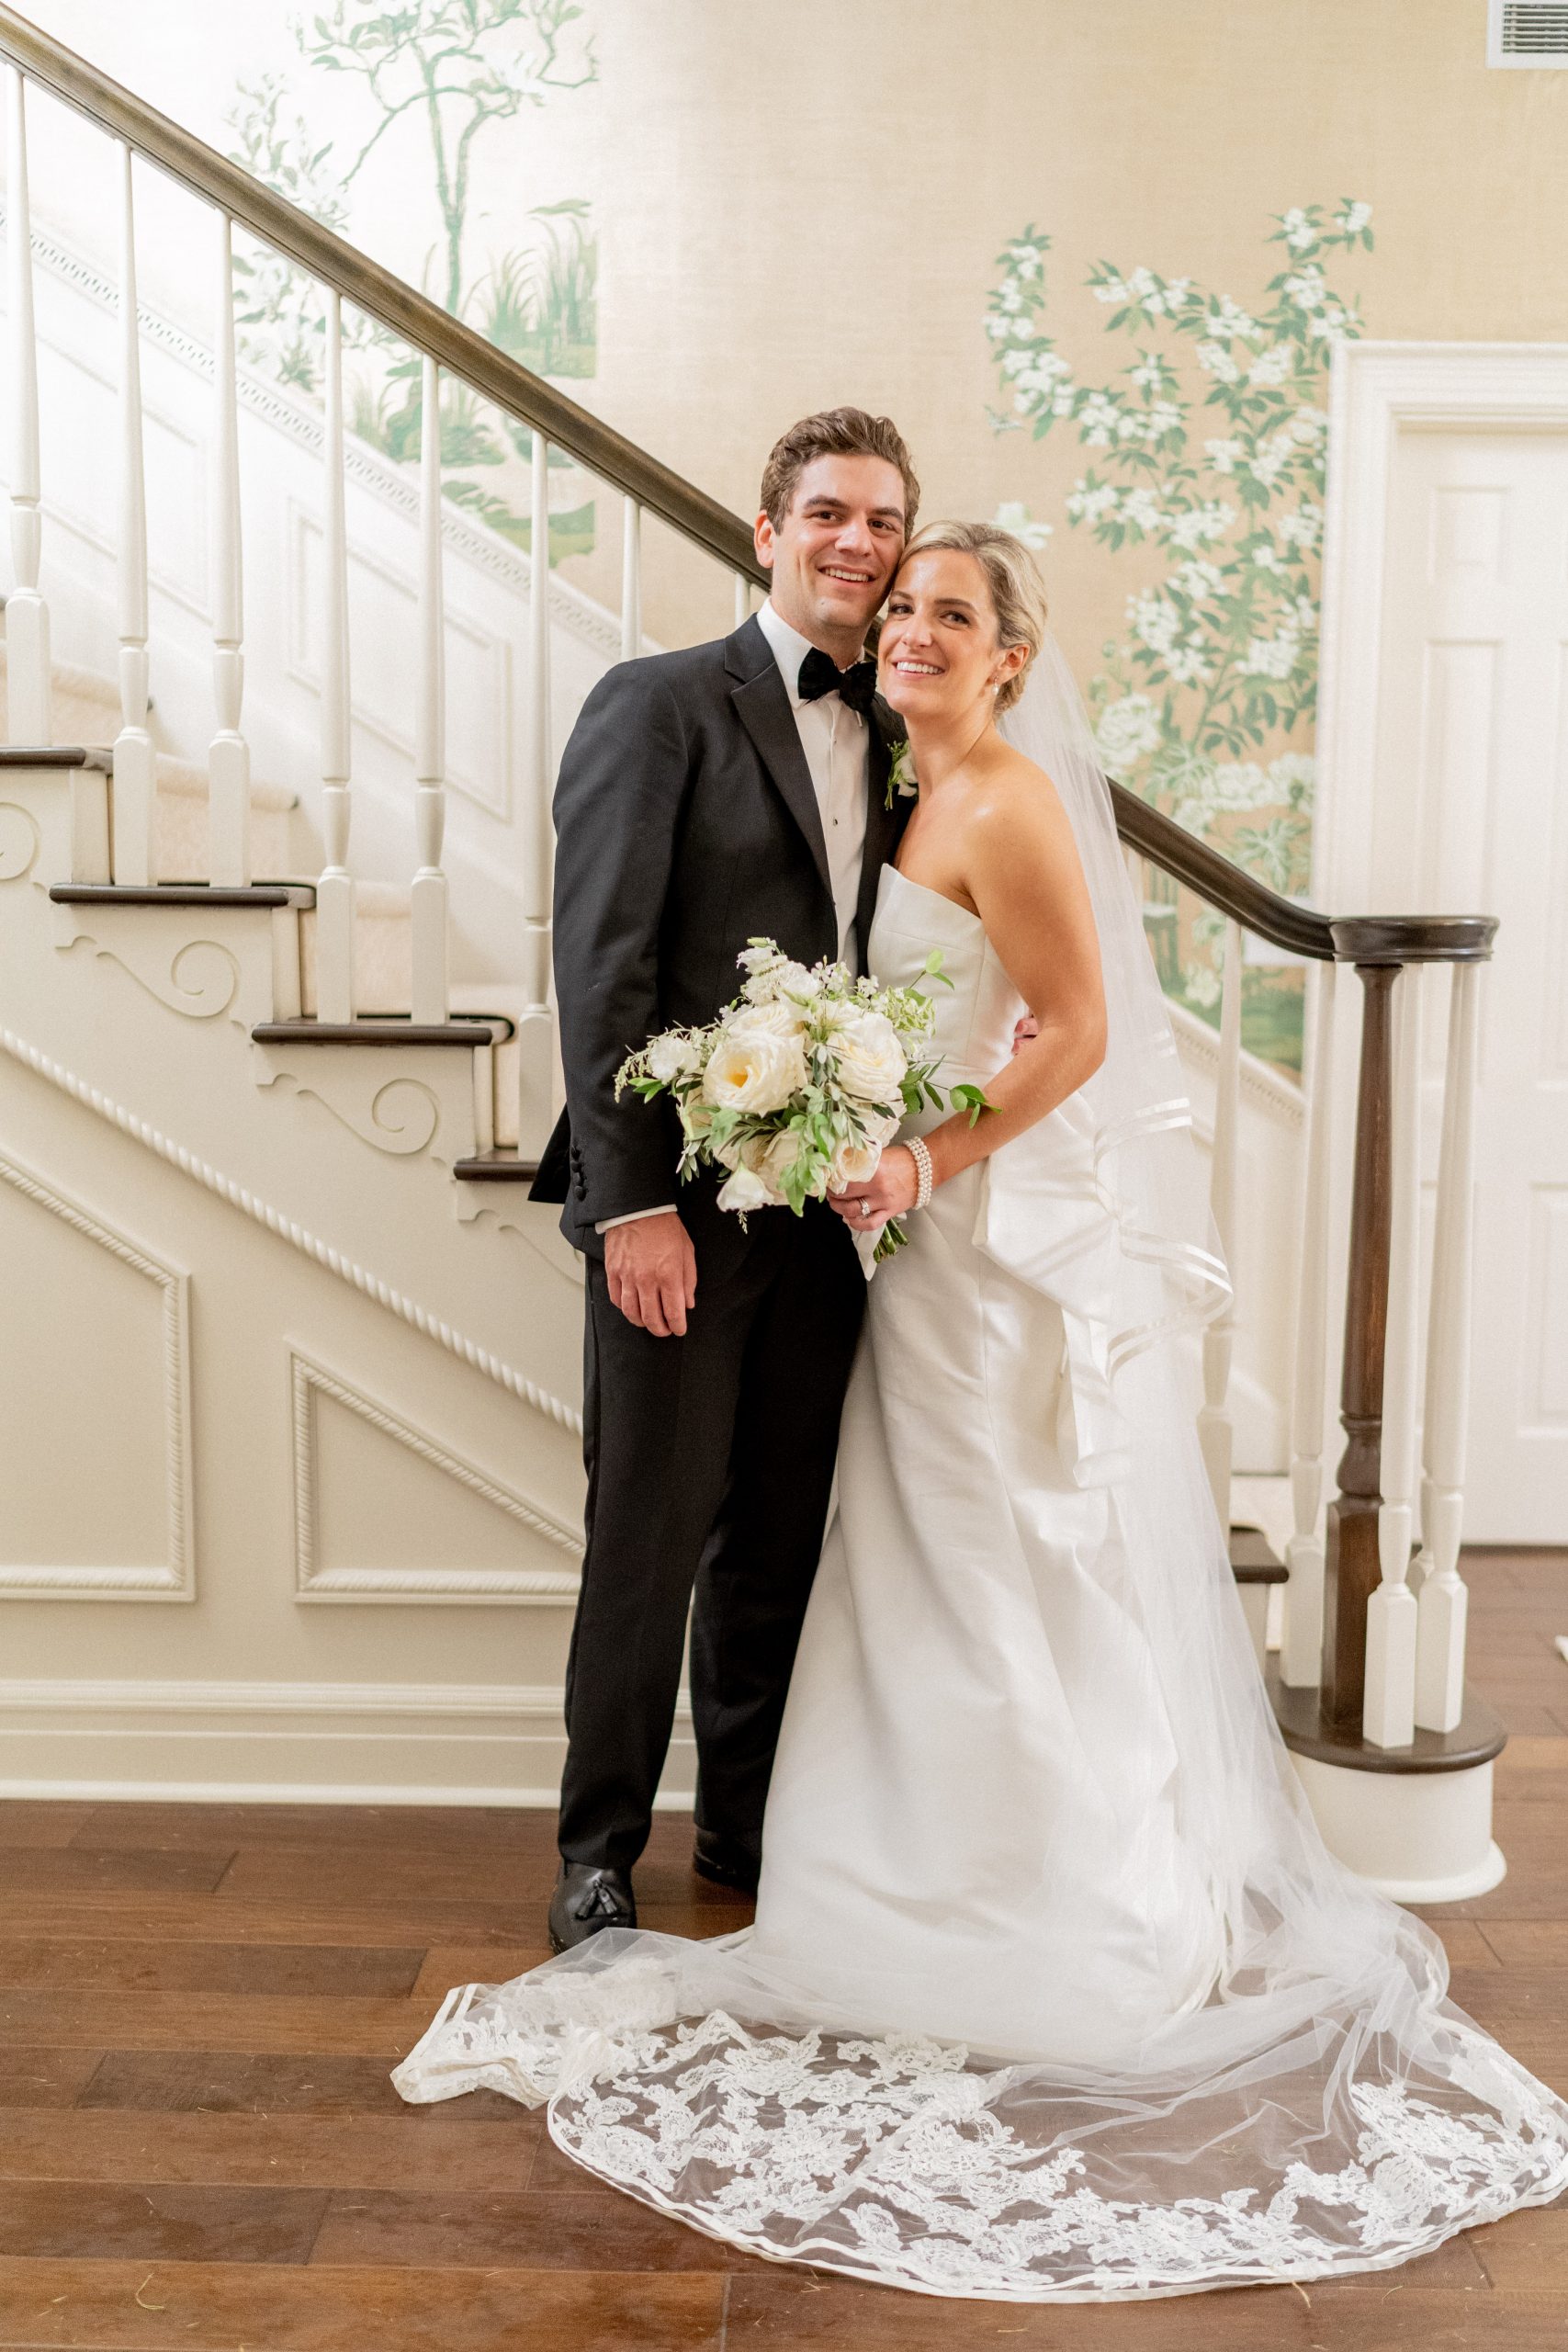 Burgess and John, both from Columbia, began dating in the 10th grade at Heathwood Hall Episcopal School and remained together for more than a decade until their long-awaited wedding day.